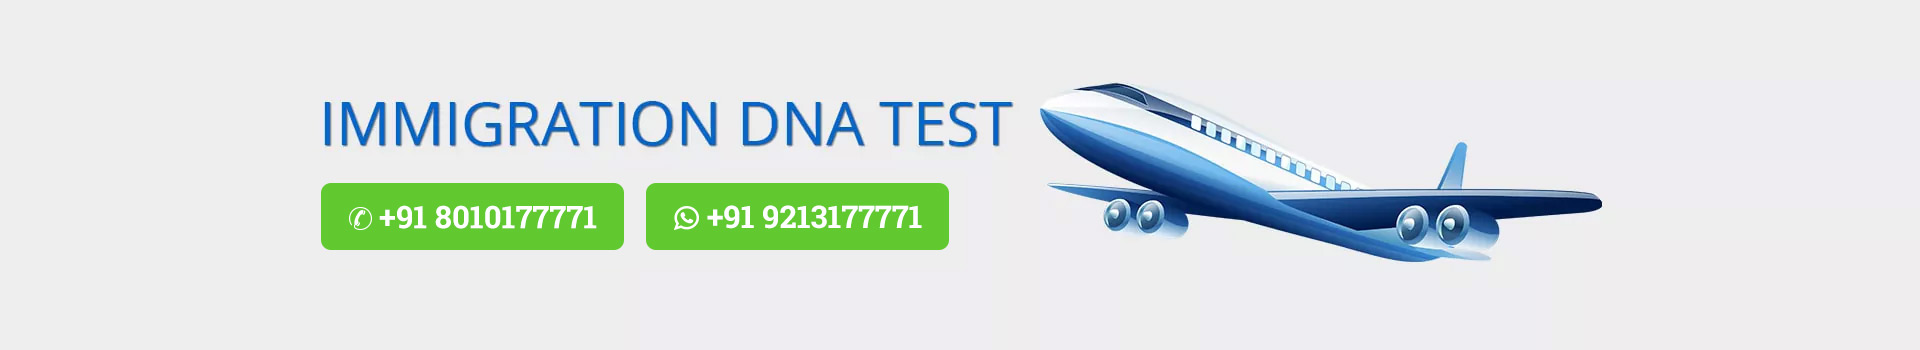 Most Accredited Immigration DNA Test in India